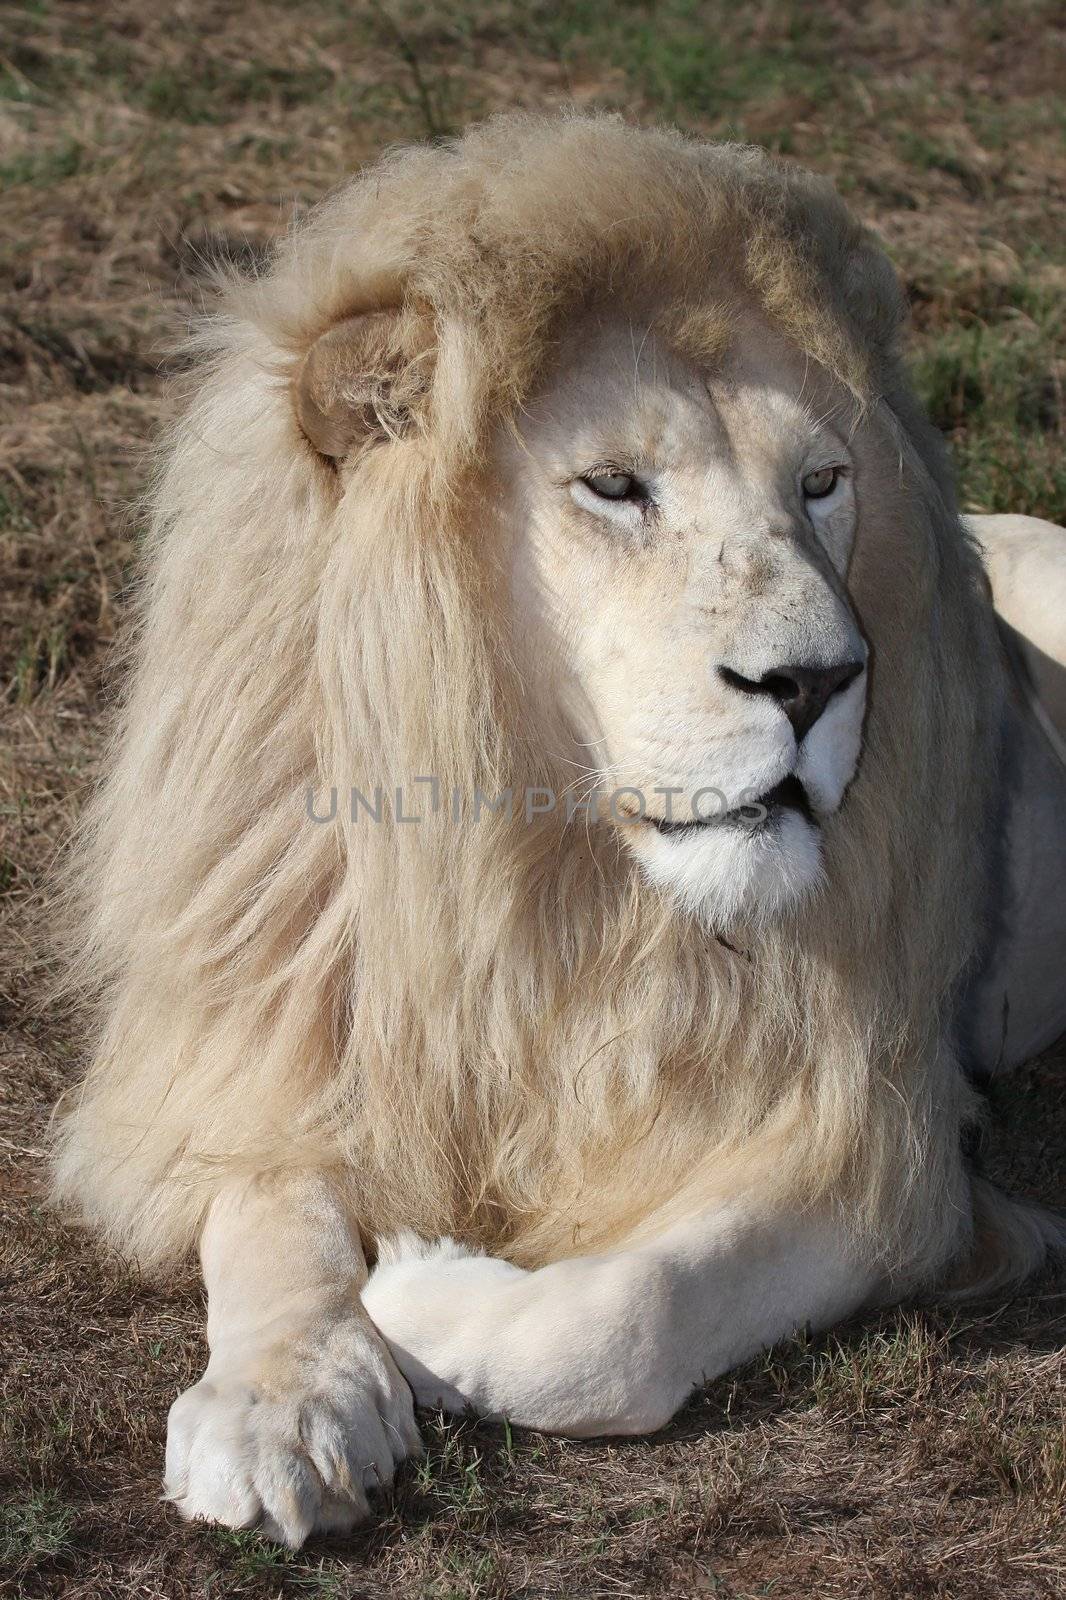 Huge male white lion with a big shaggy mane